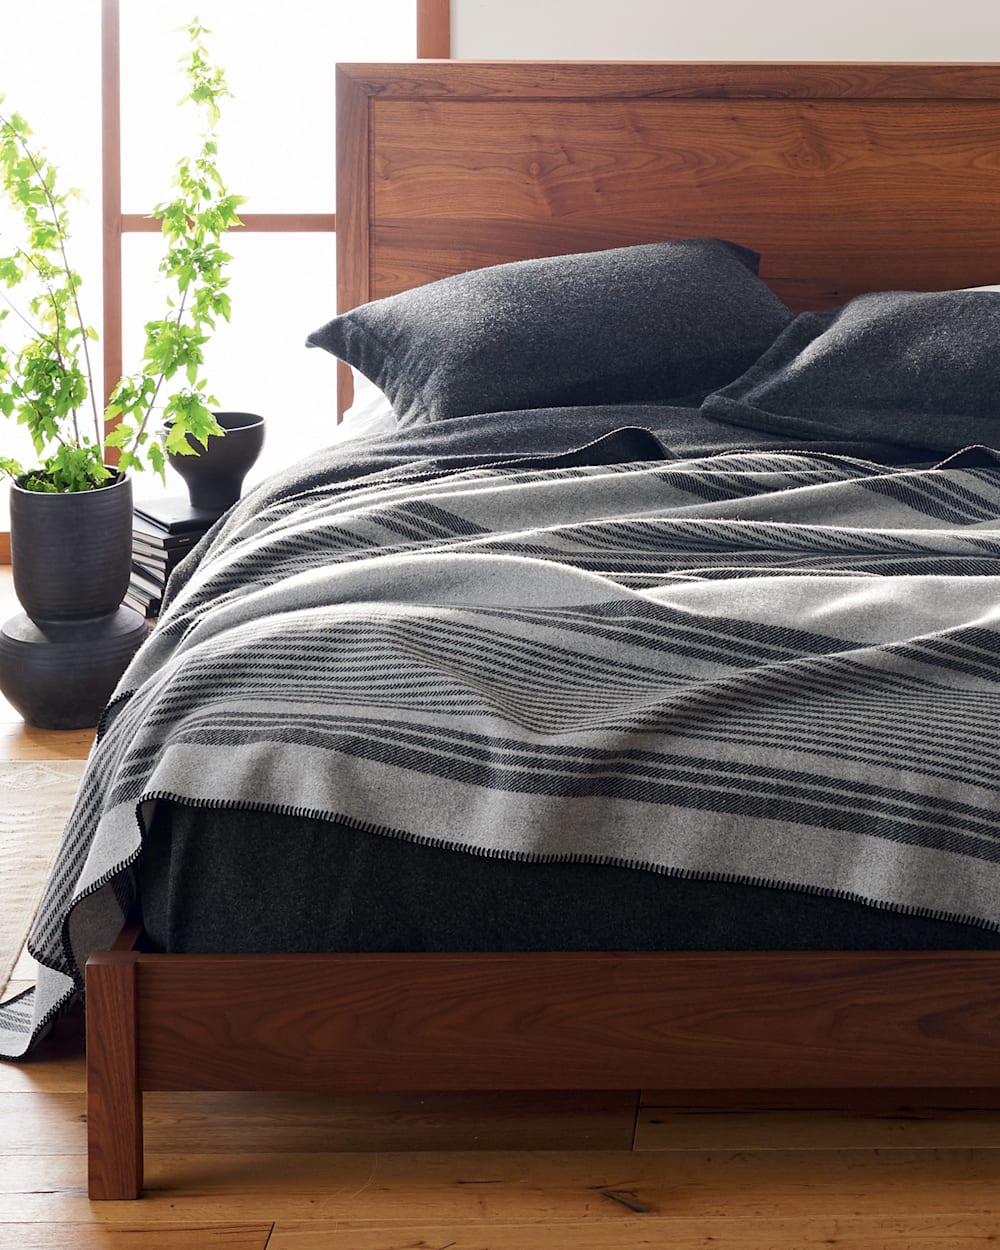 ECO-WISE WOOL PLAID/STRIPE BLANKET IN GREY IRVING STRIPE SHOWN ON BED image number 3